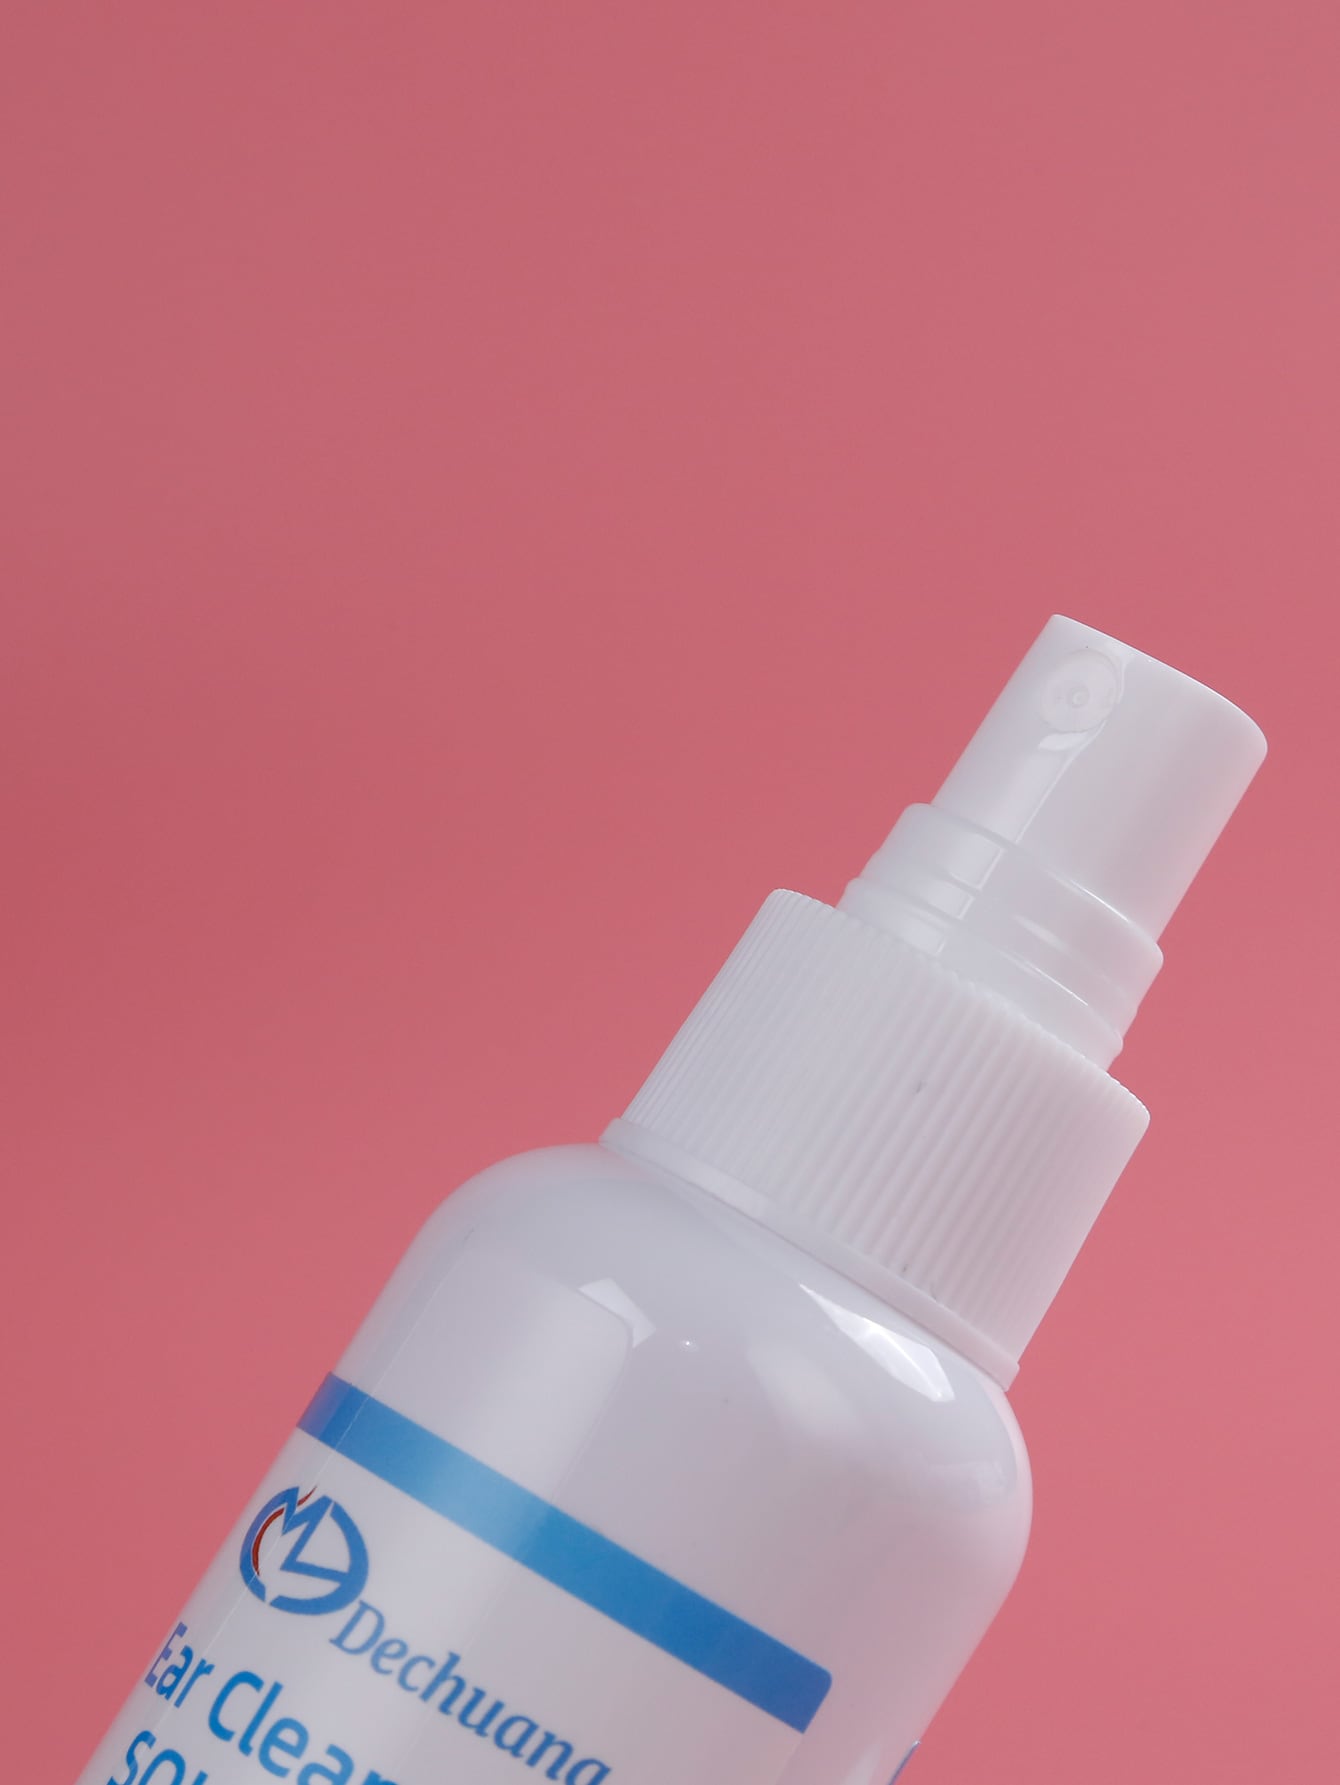 60ml Pet Ear Cleaning Solution